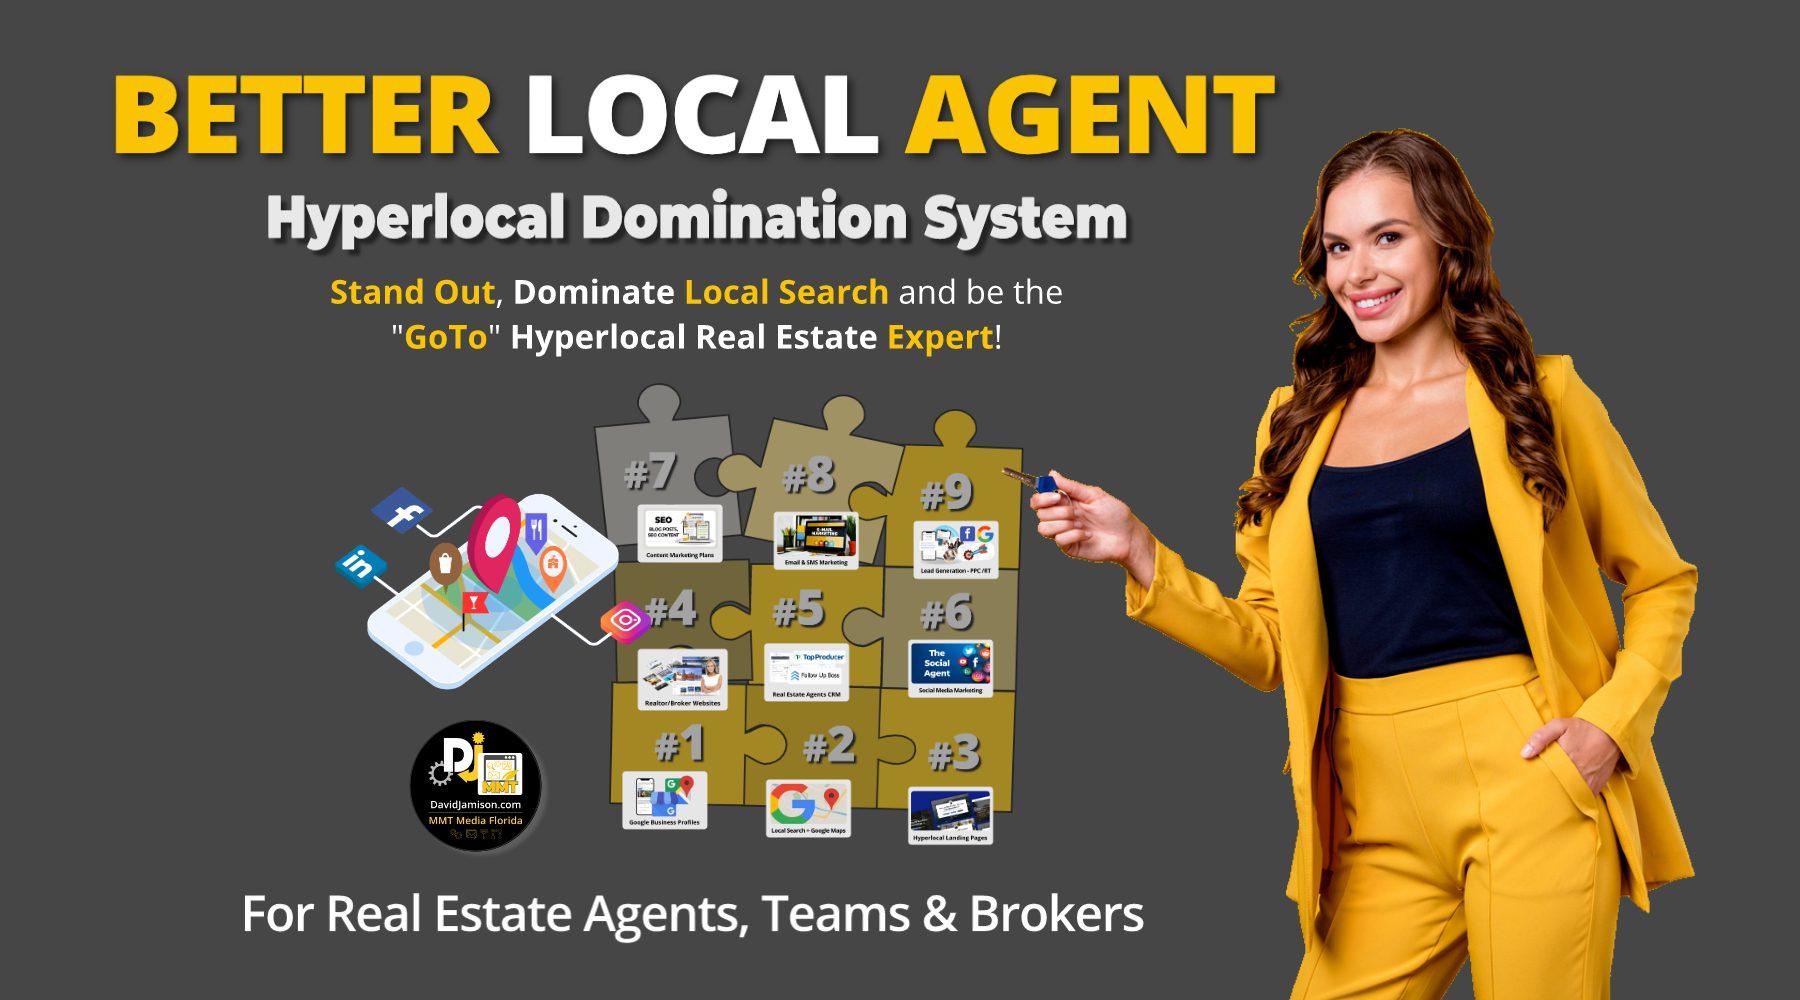 Better Local Agent by MMT Media Florida